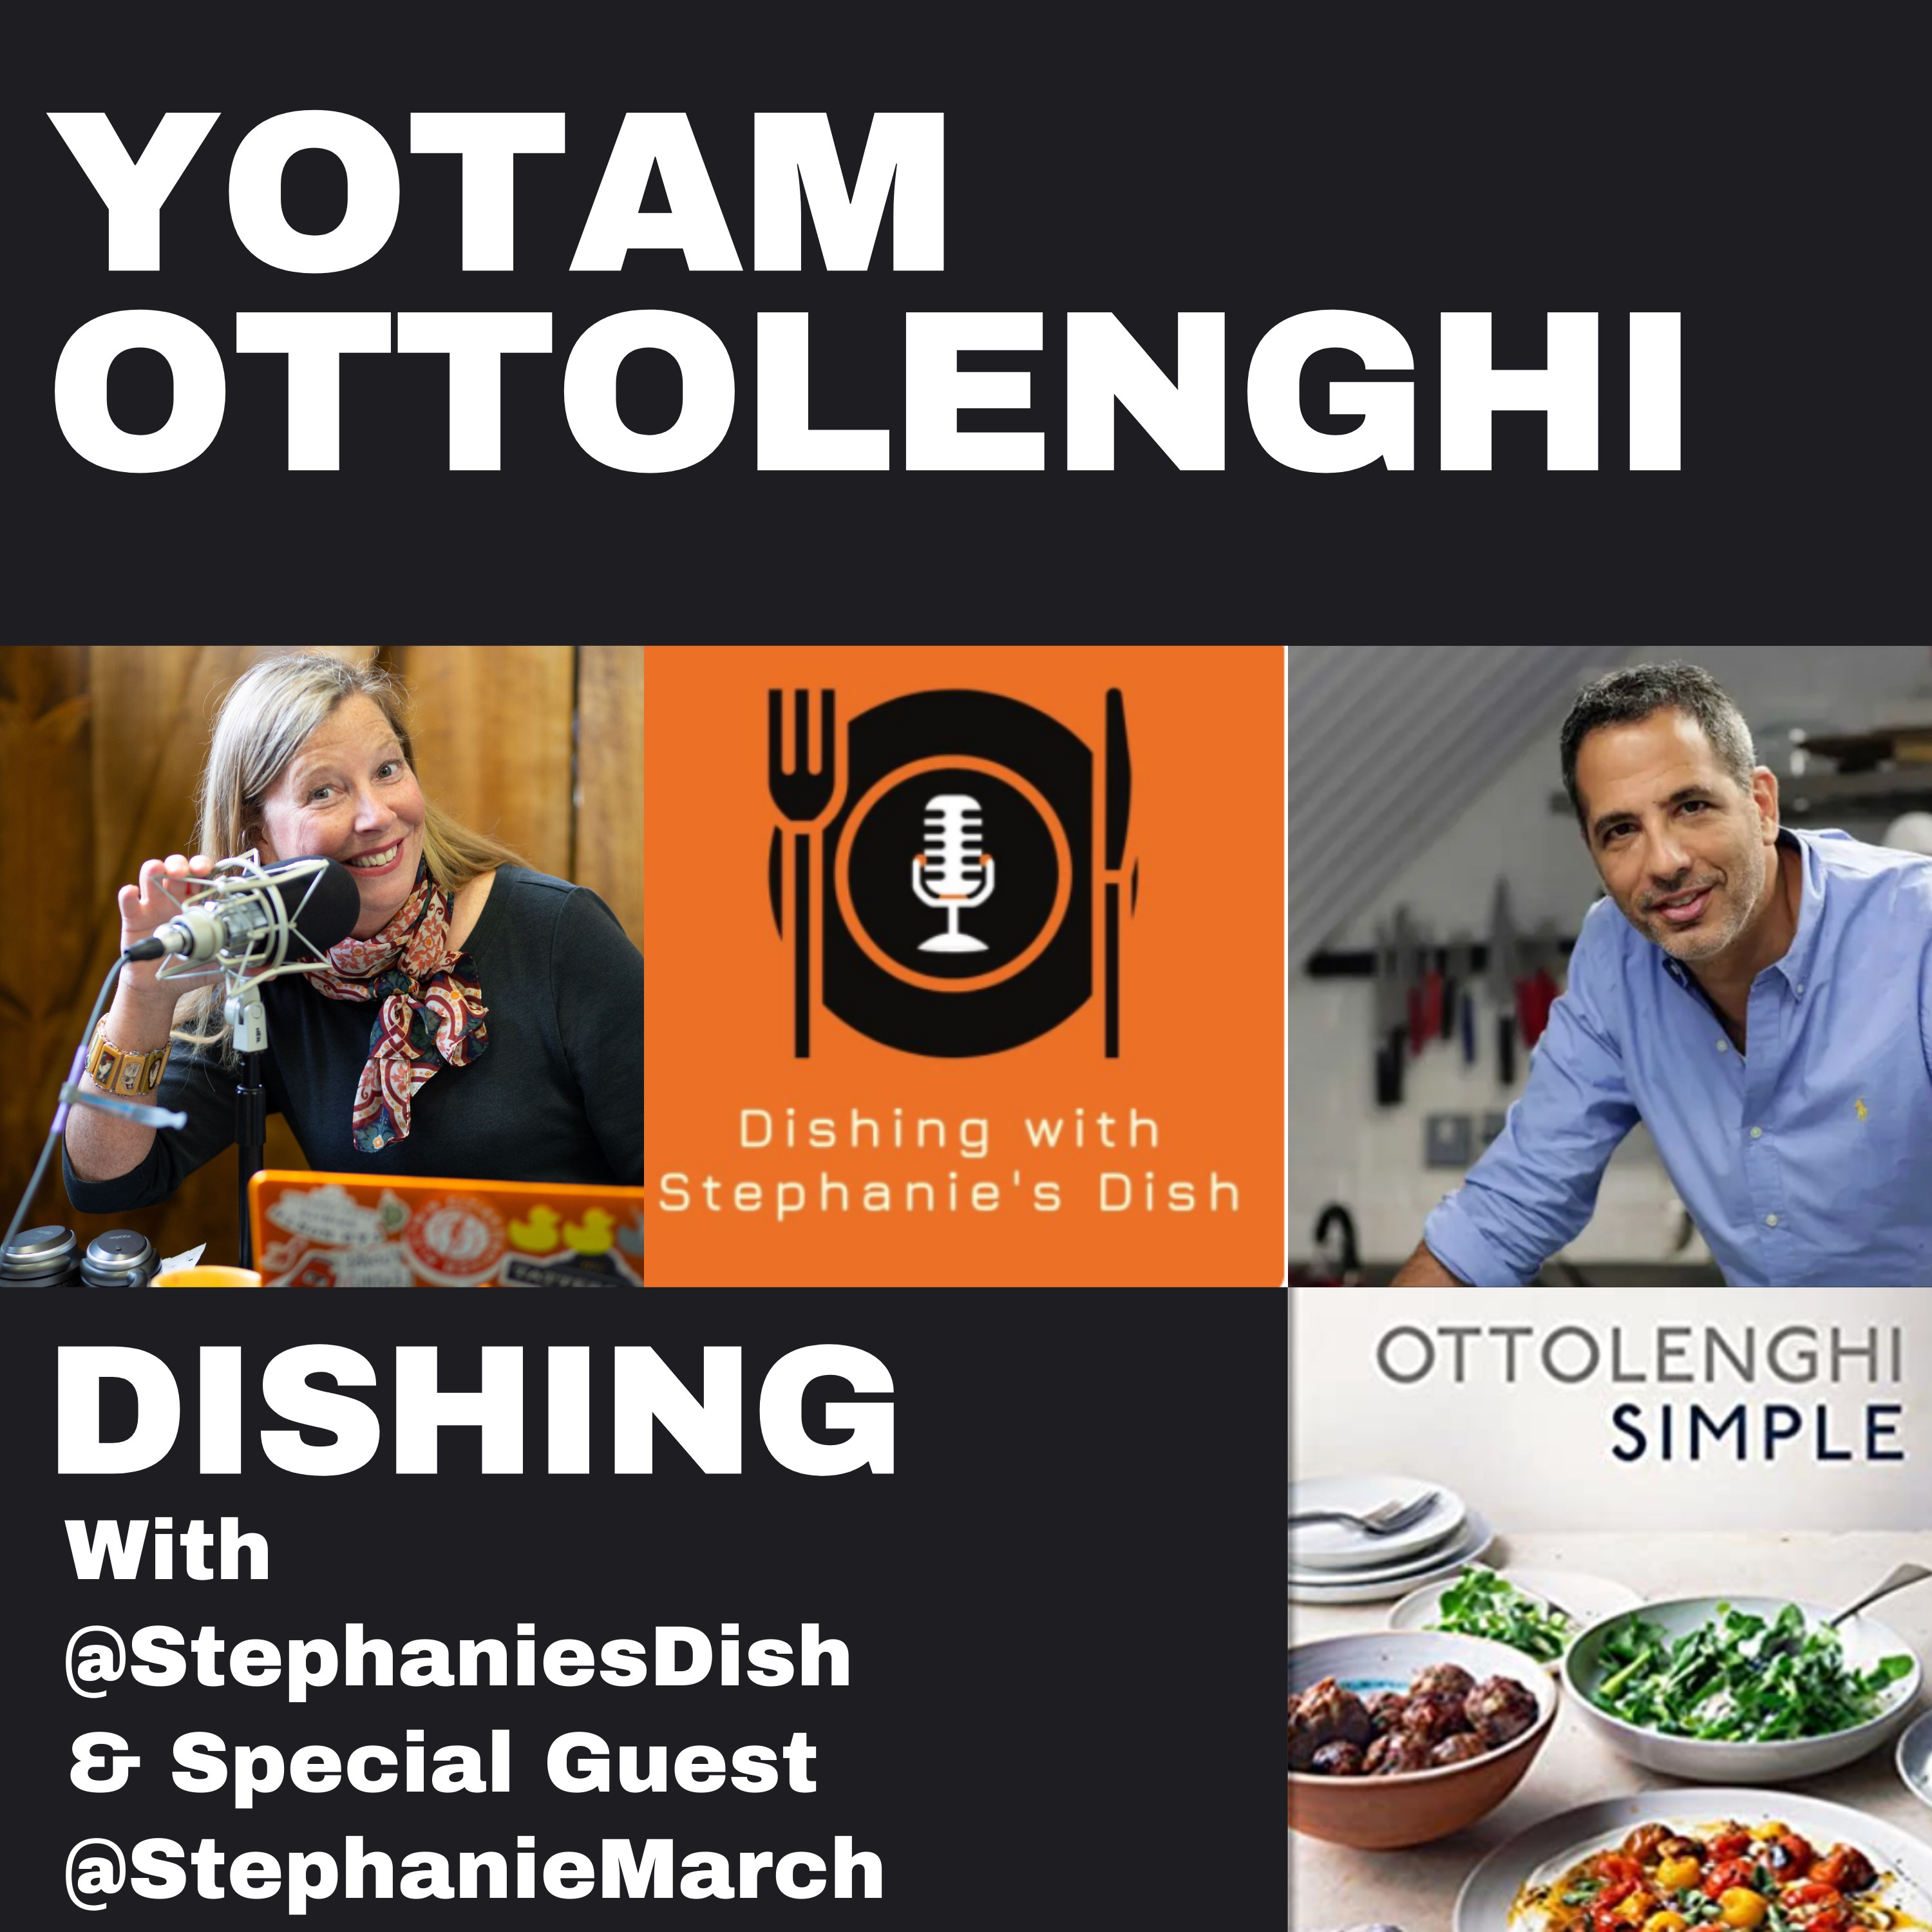 Whether you're short on time, making ahead or looking for a lazy-day dish, Ottolenghi  Simple satisfies